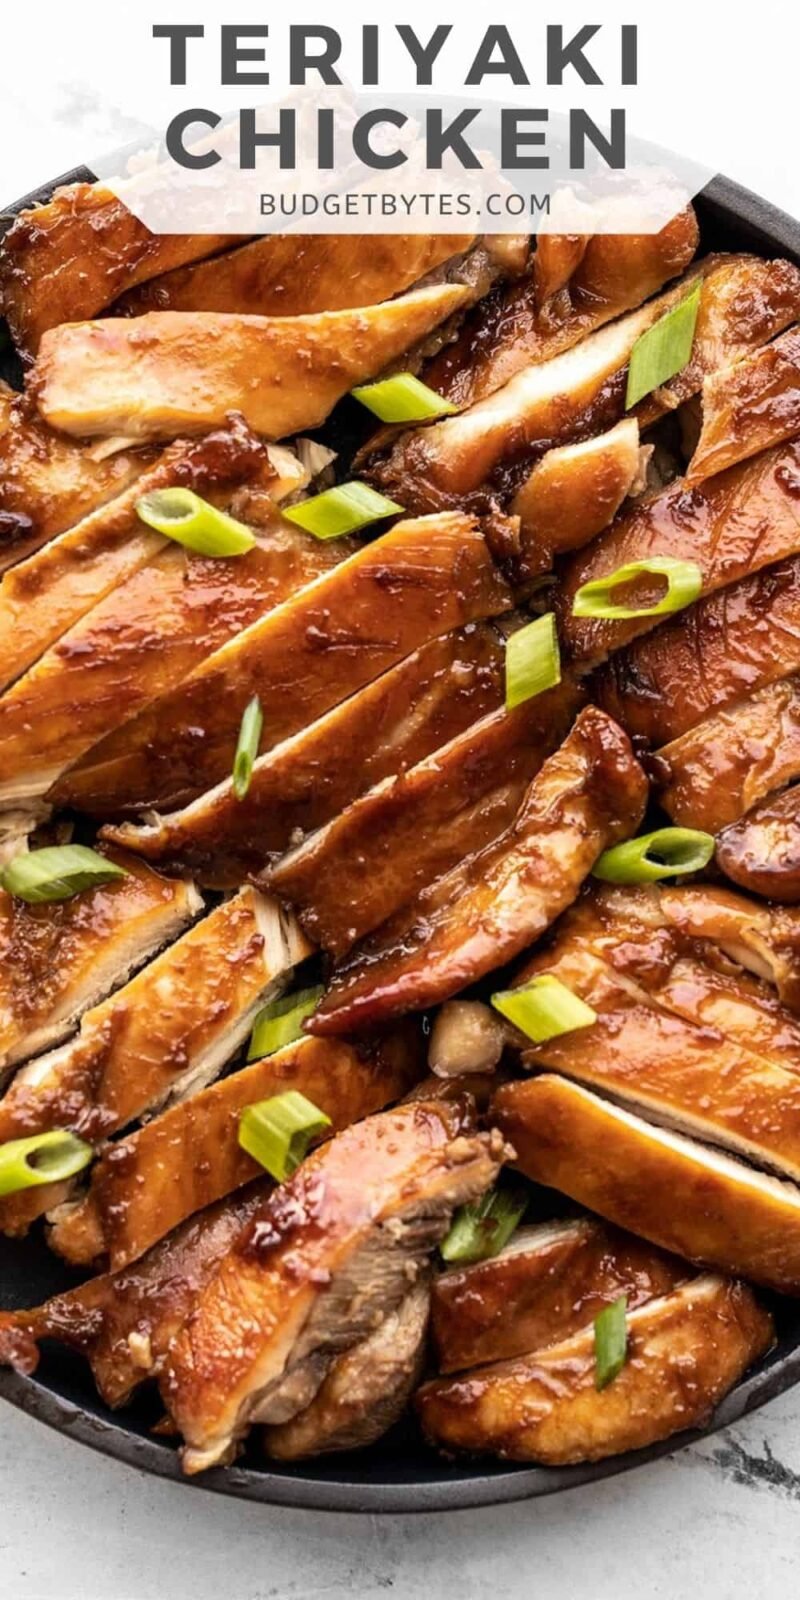 Sliced teriyaki chicken on a platter, title text at the top.